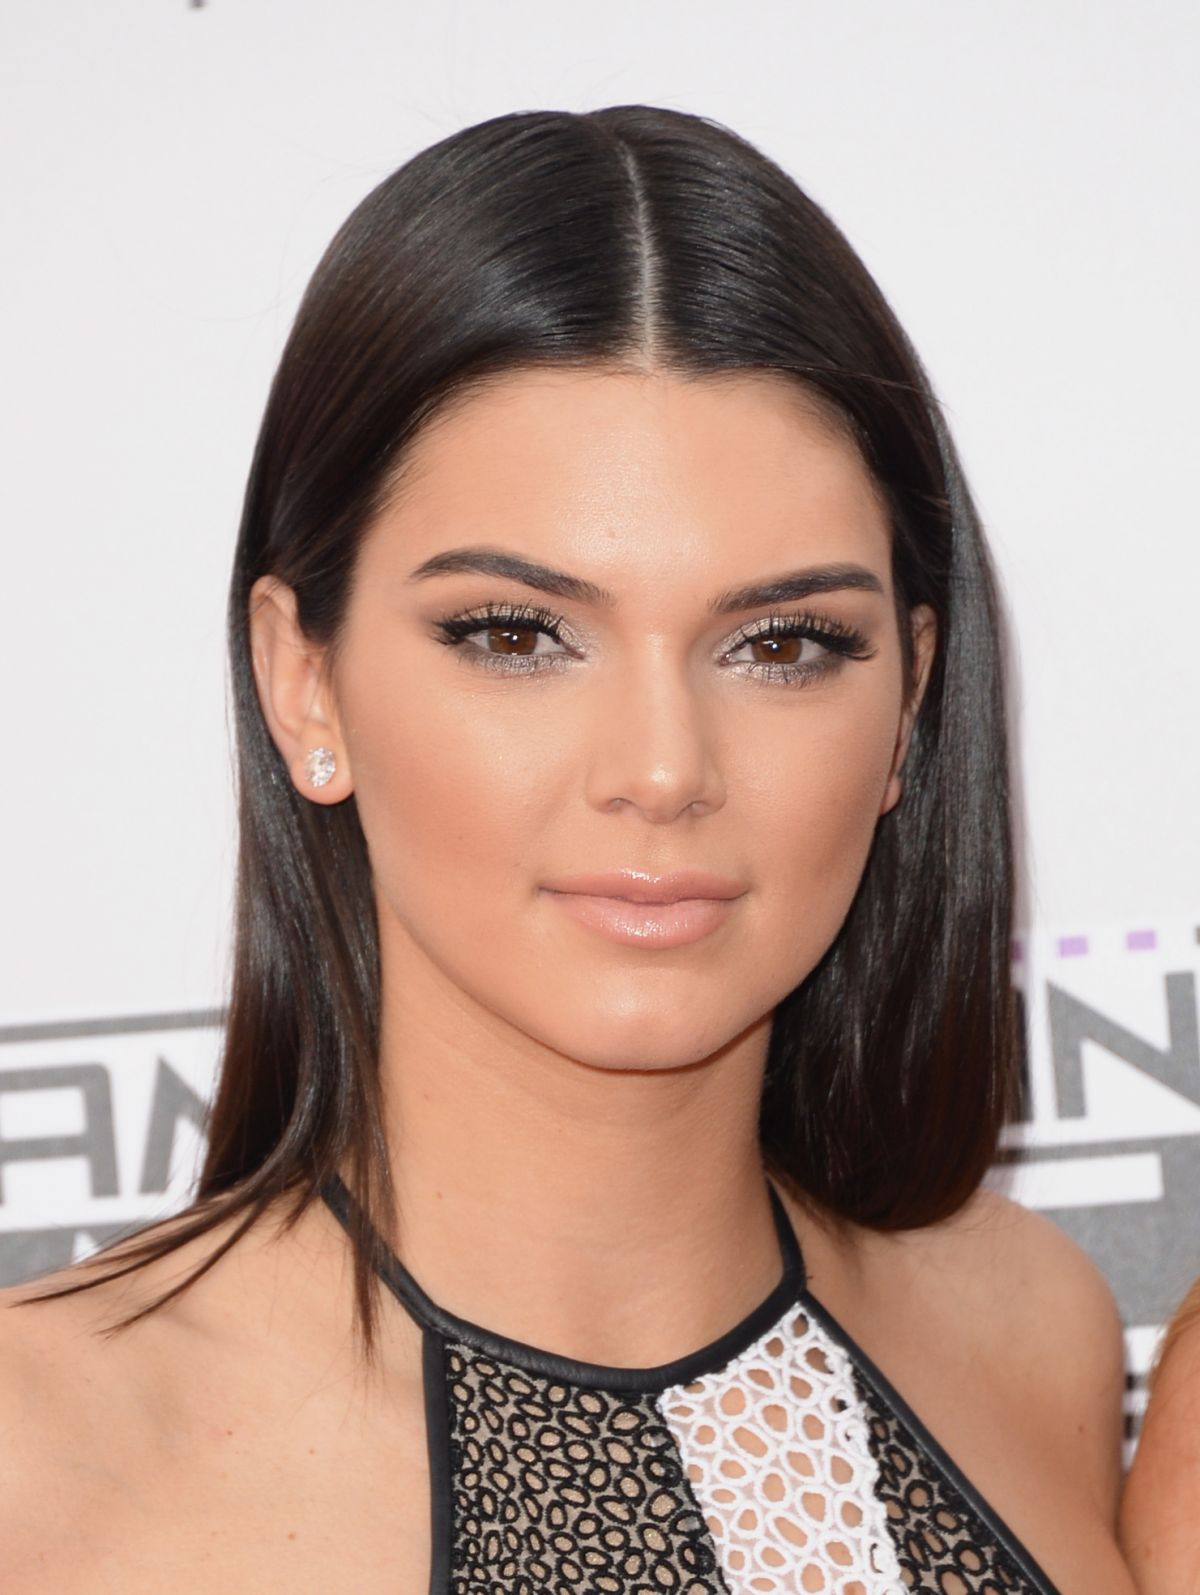 KENDALL JENNER at 2014 American Music Awards in Los Angeles - HawtCelebs